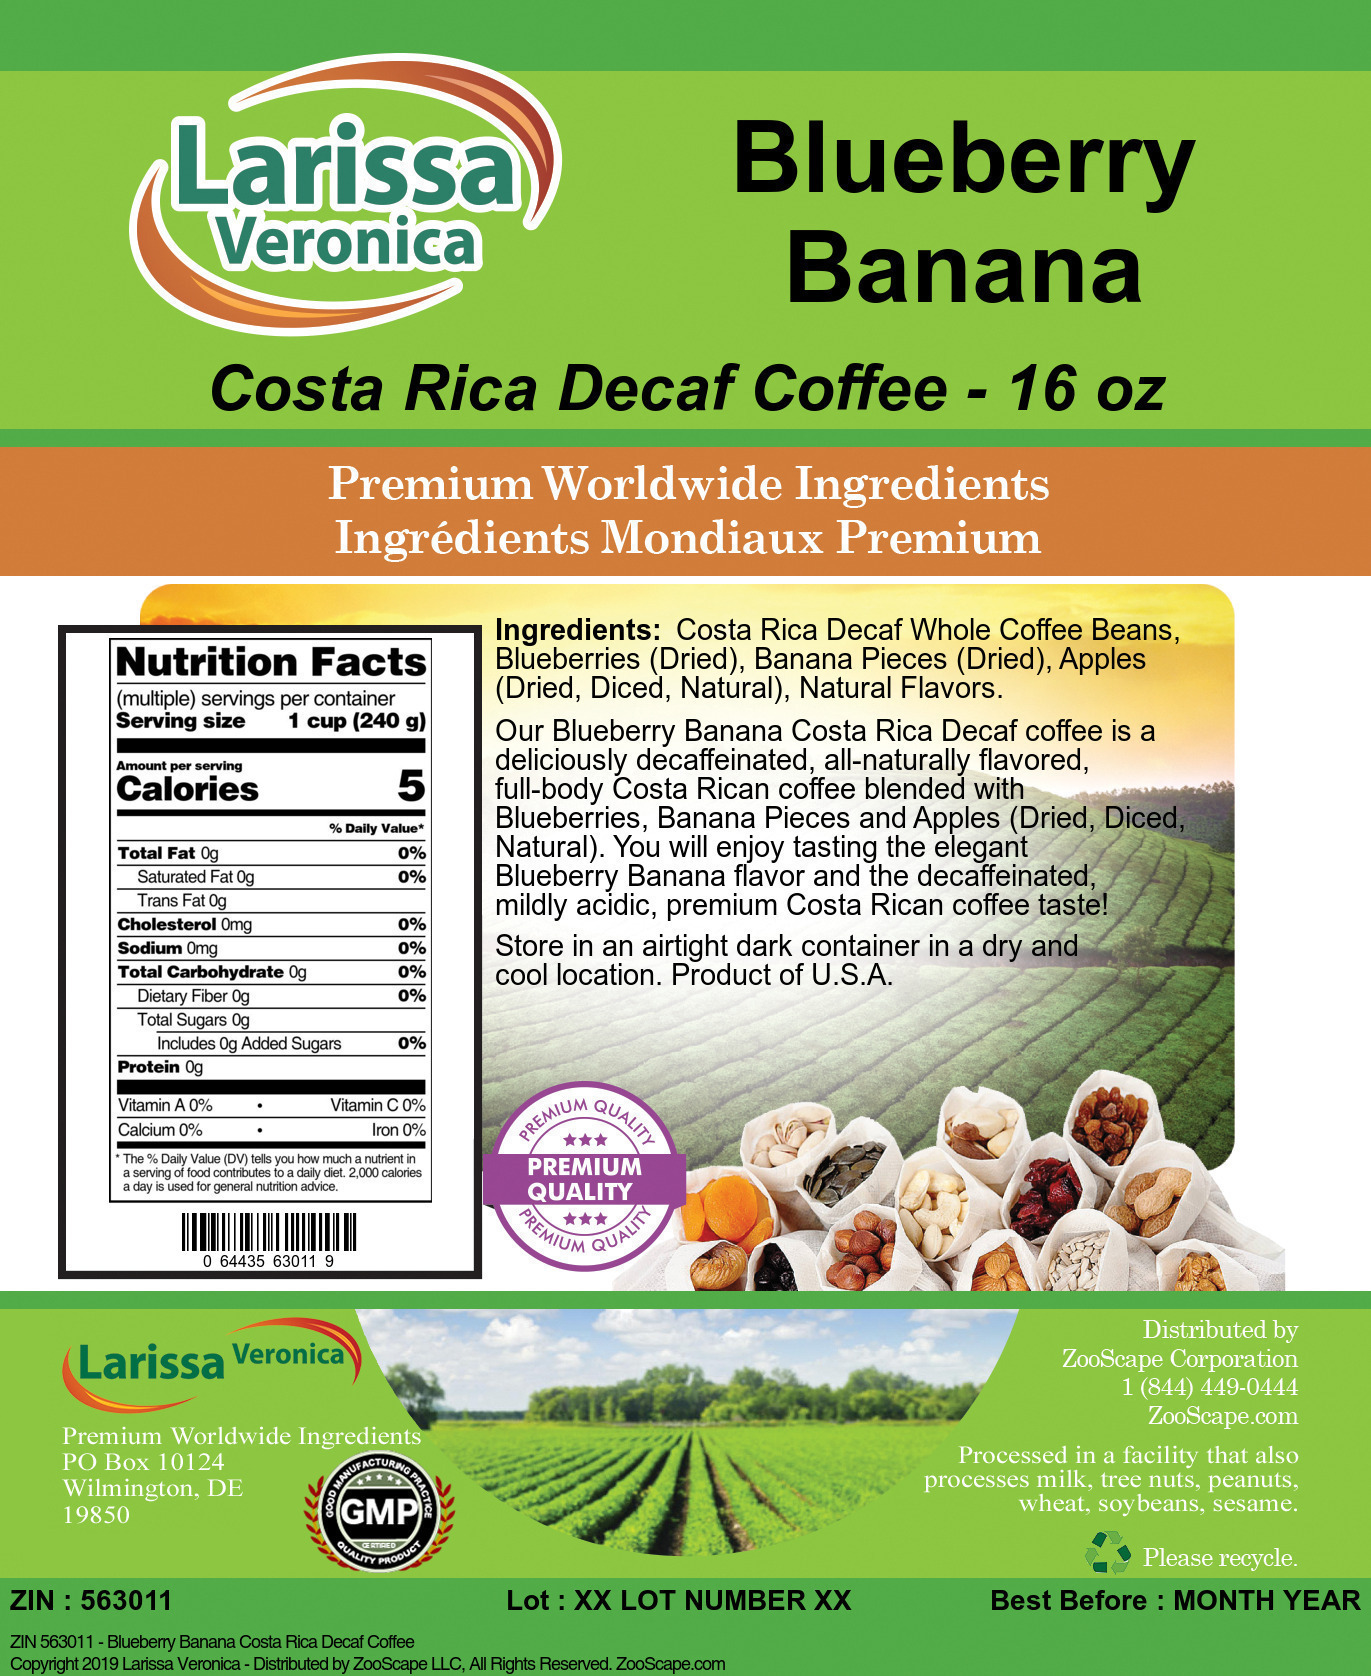 Blueberry Banana Costa Rica Decaf Coffee - Label